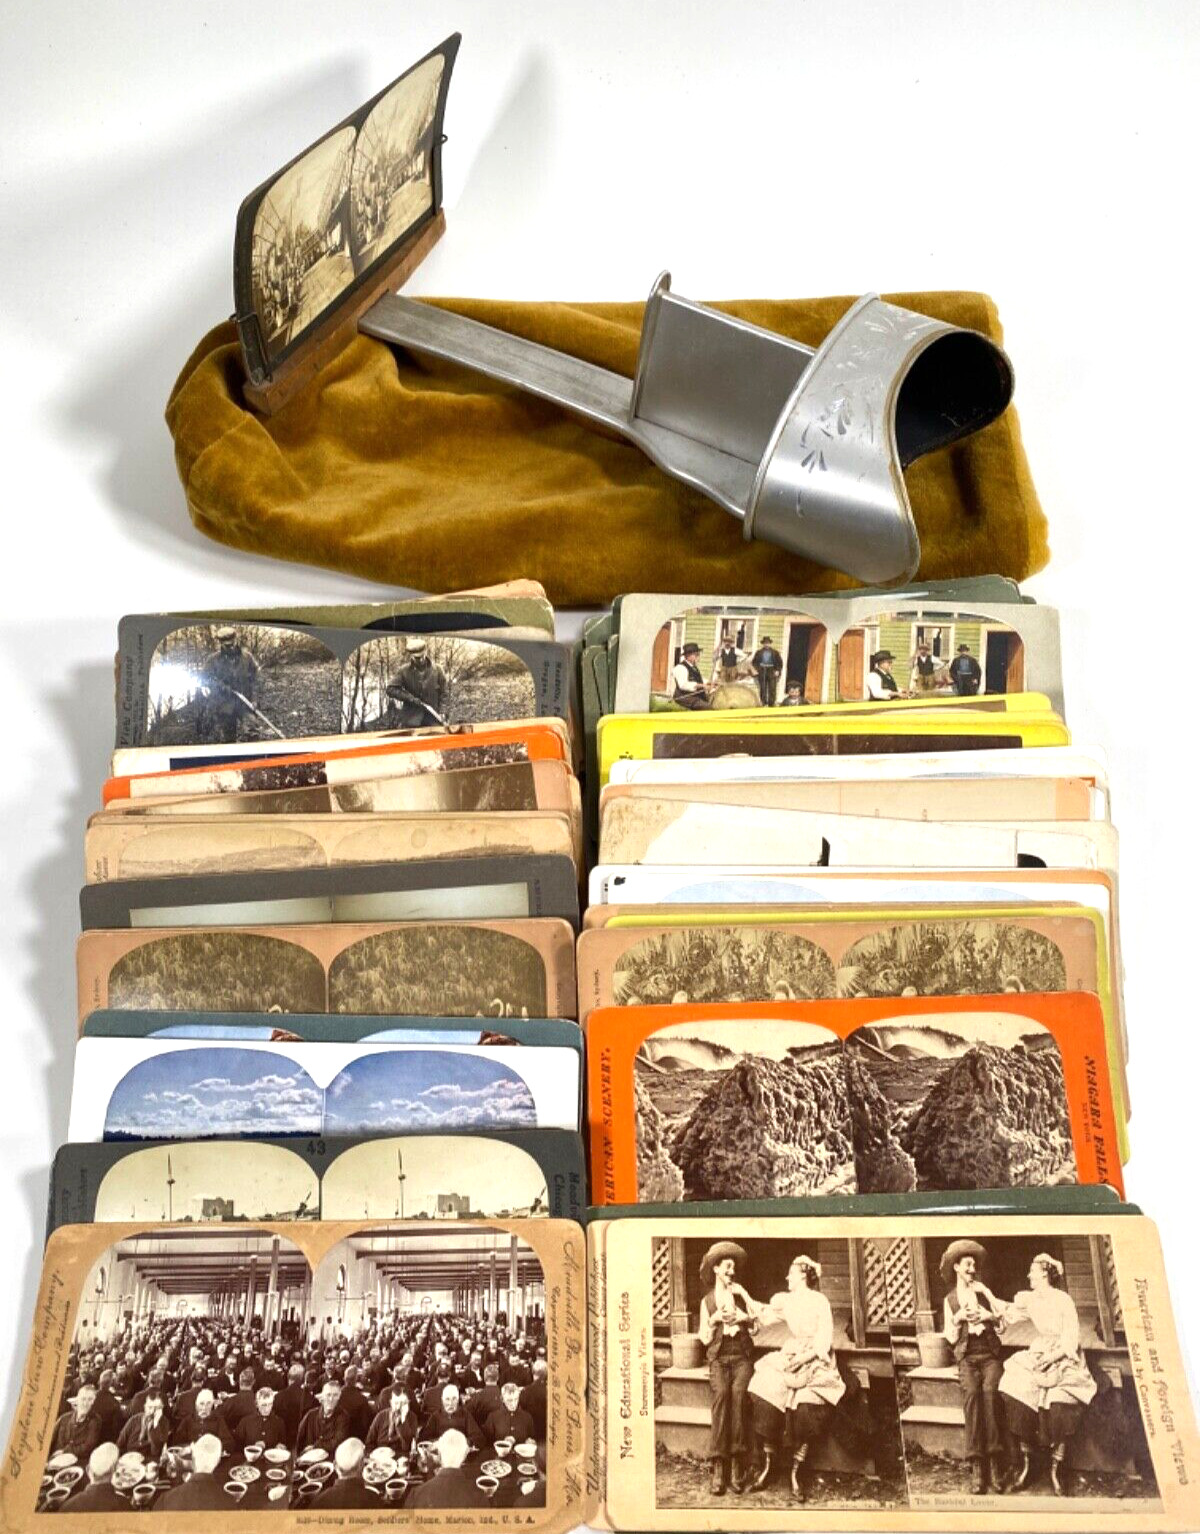 1900s ANTIQUE STEREOVIEW 3-D VIEWER includes lot of 90 stereo-view photographs